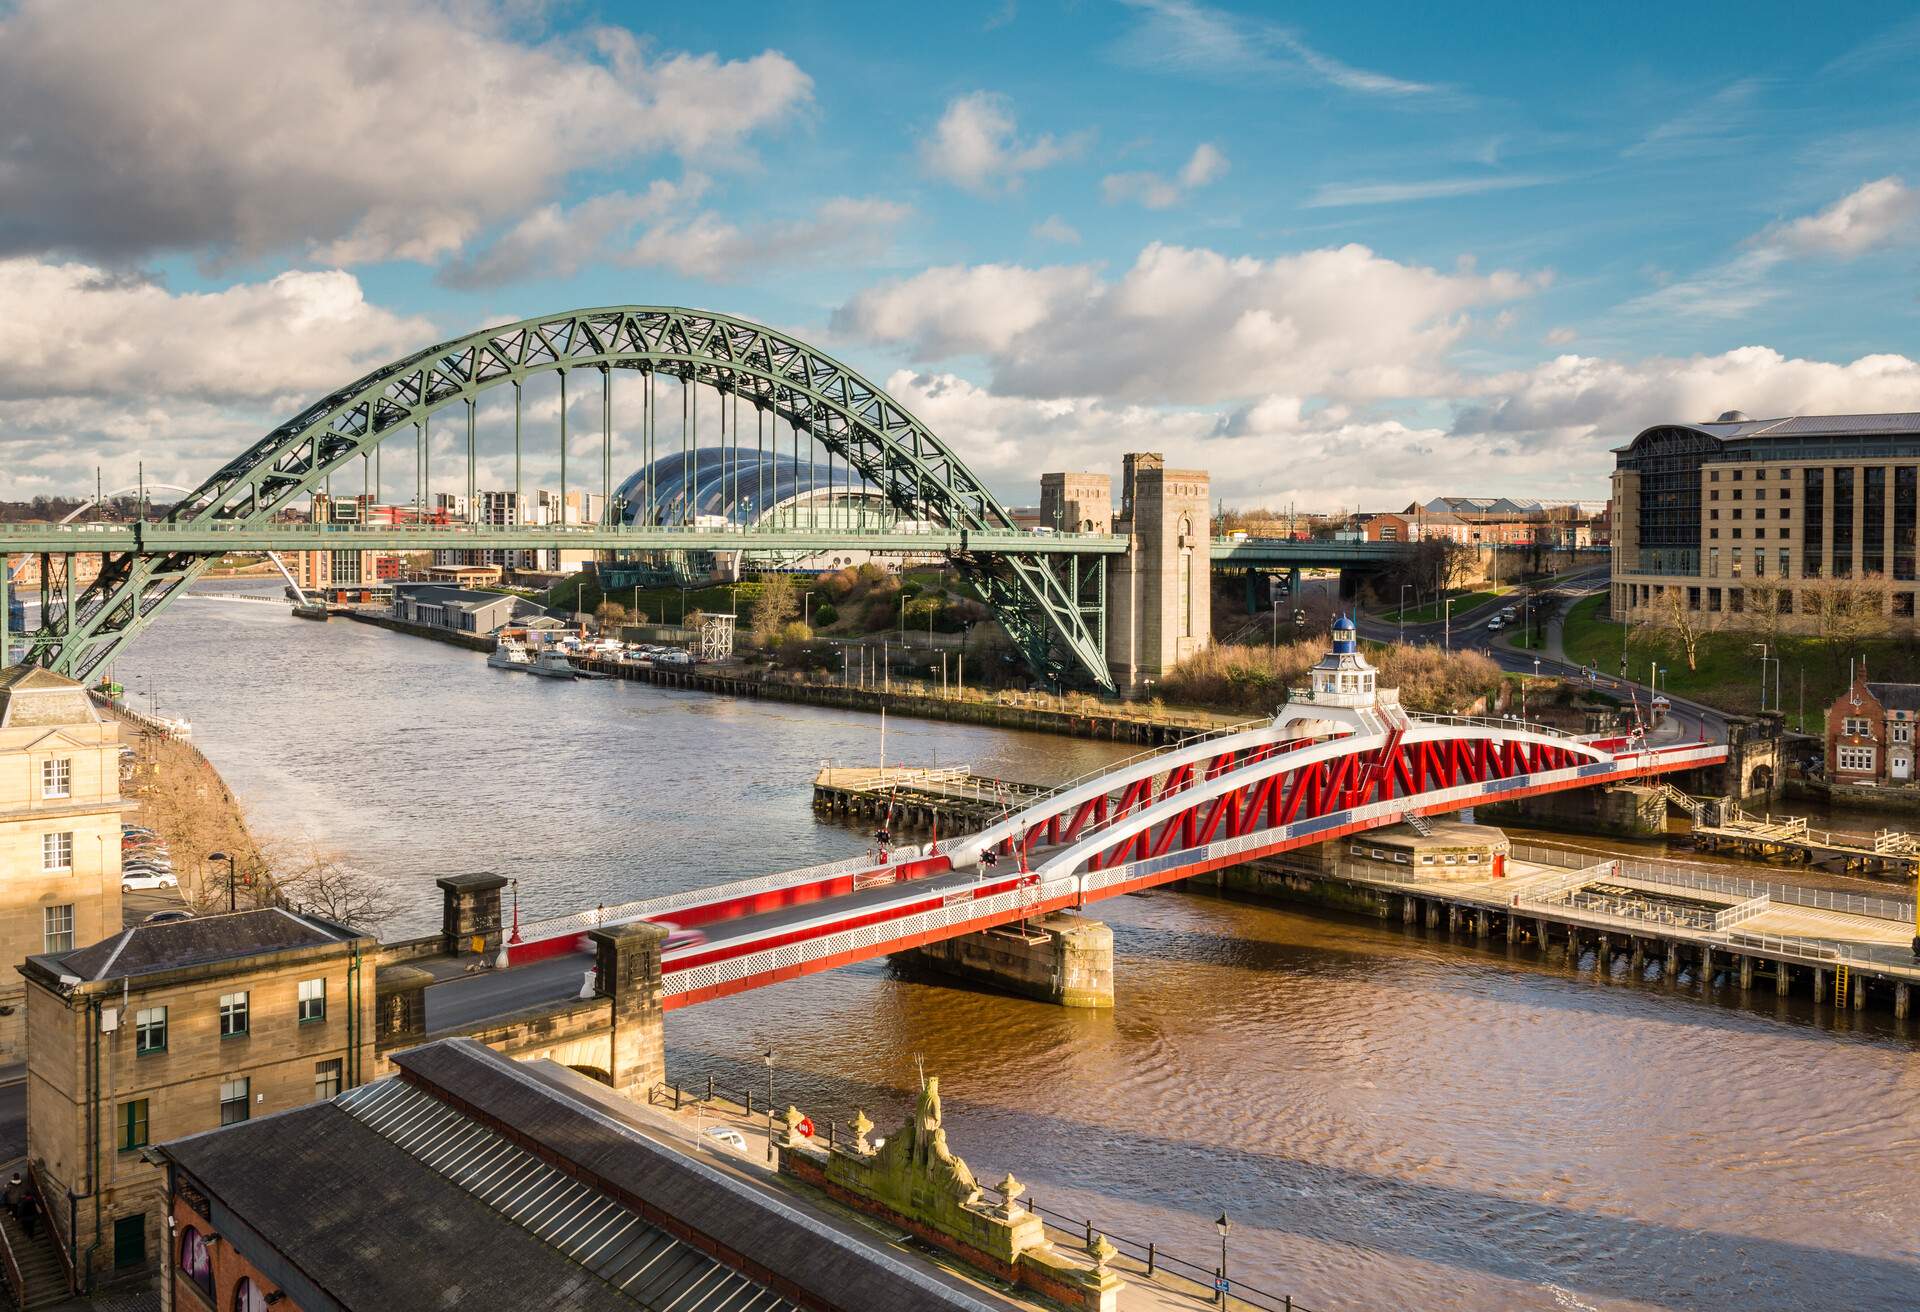 The iconic bridges over the River Tyne between Newcastle and Gateshead have become famous and attract many visitors to the quayside